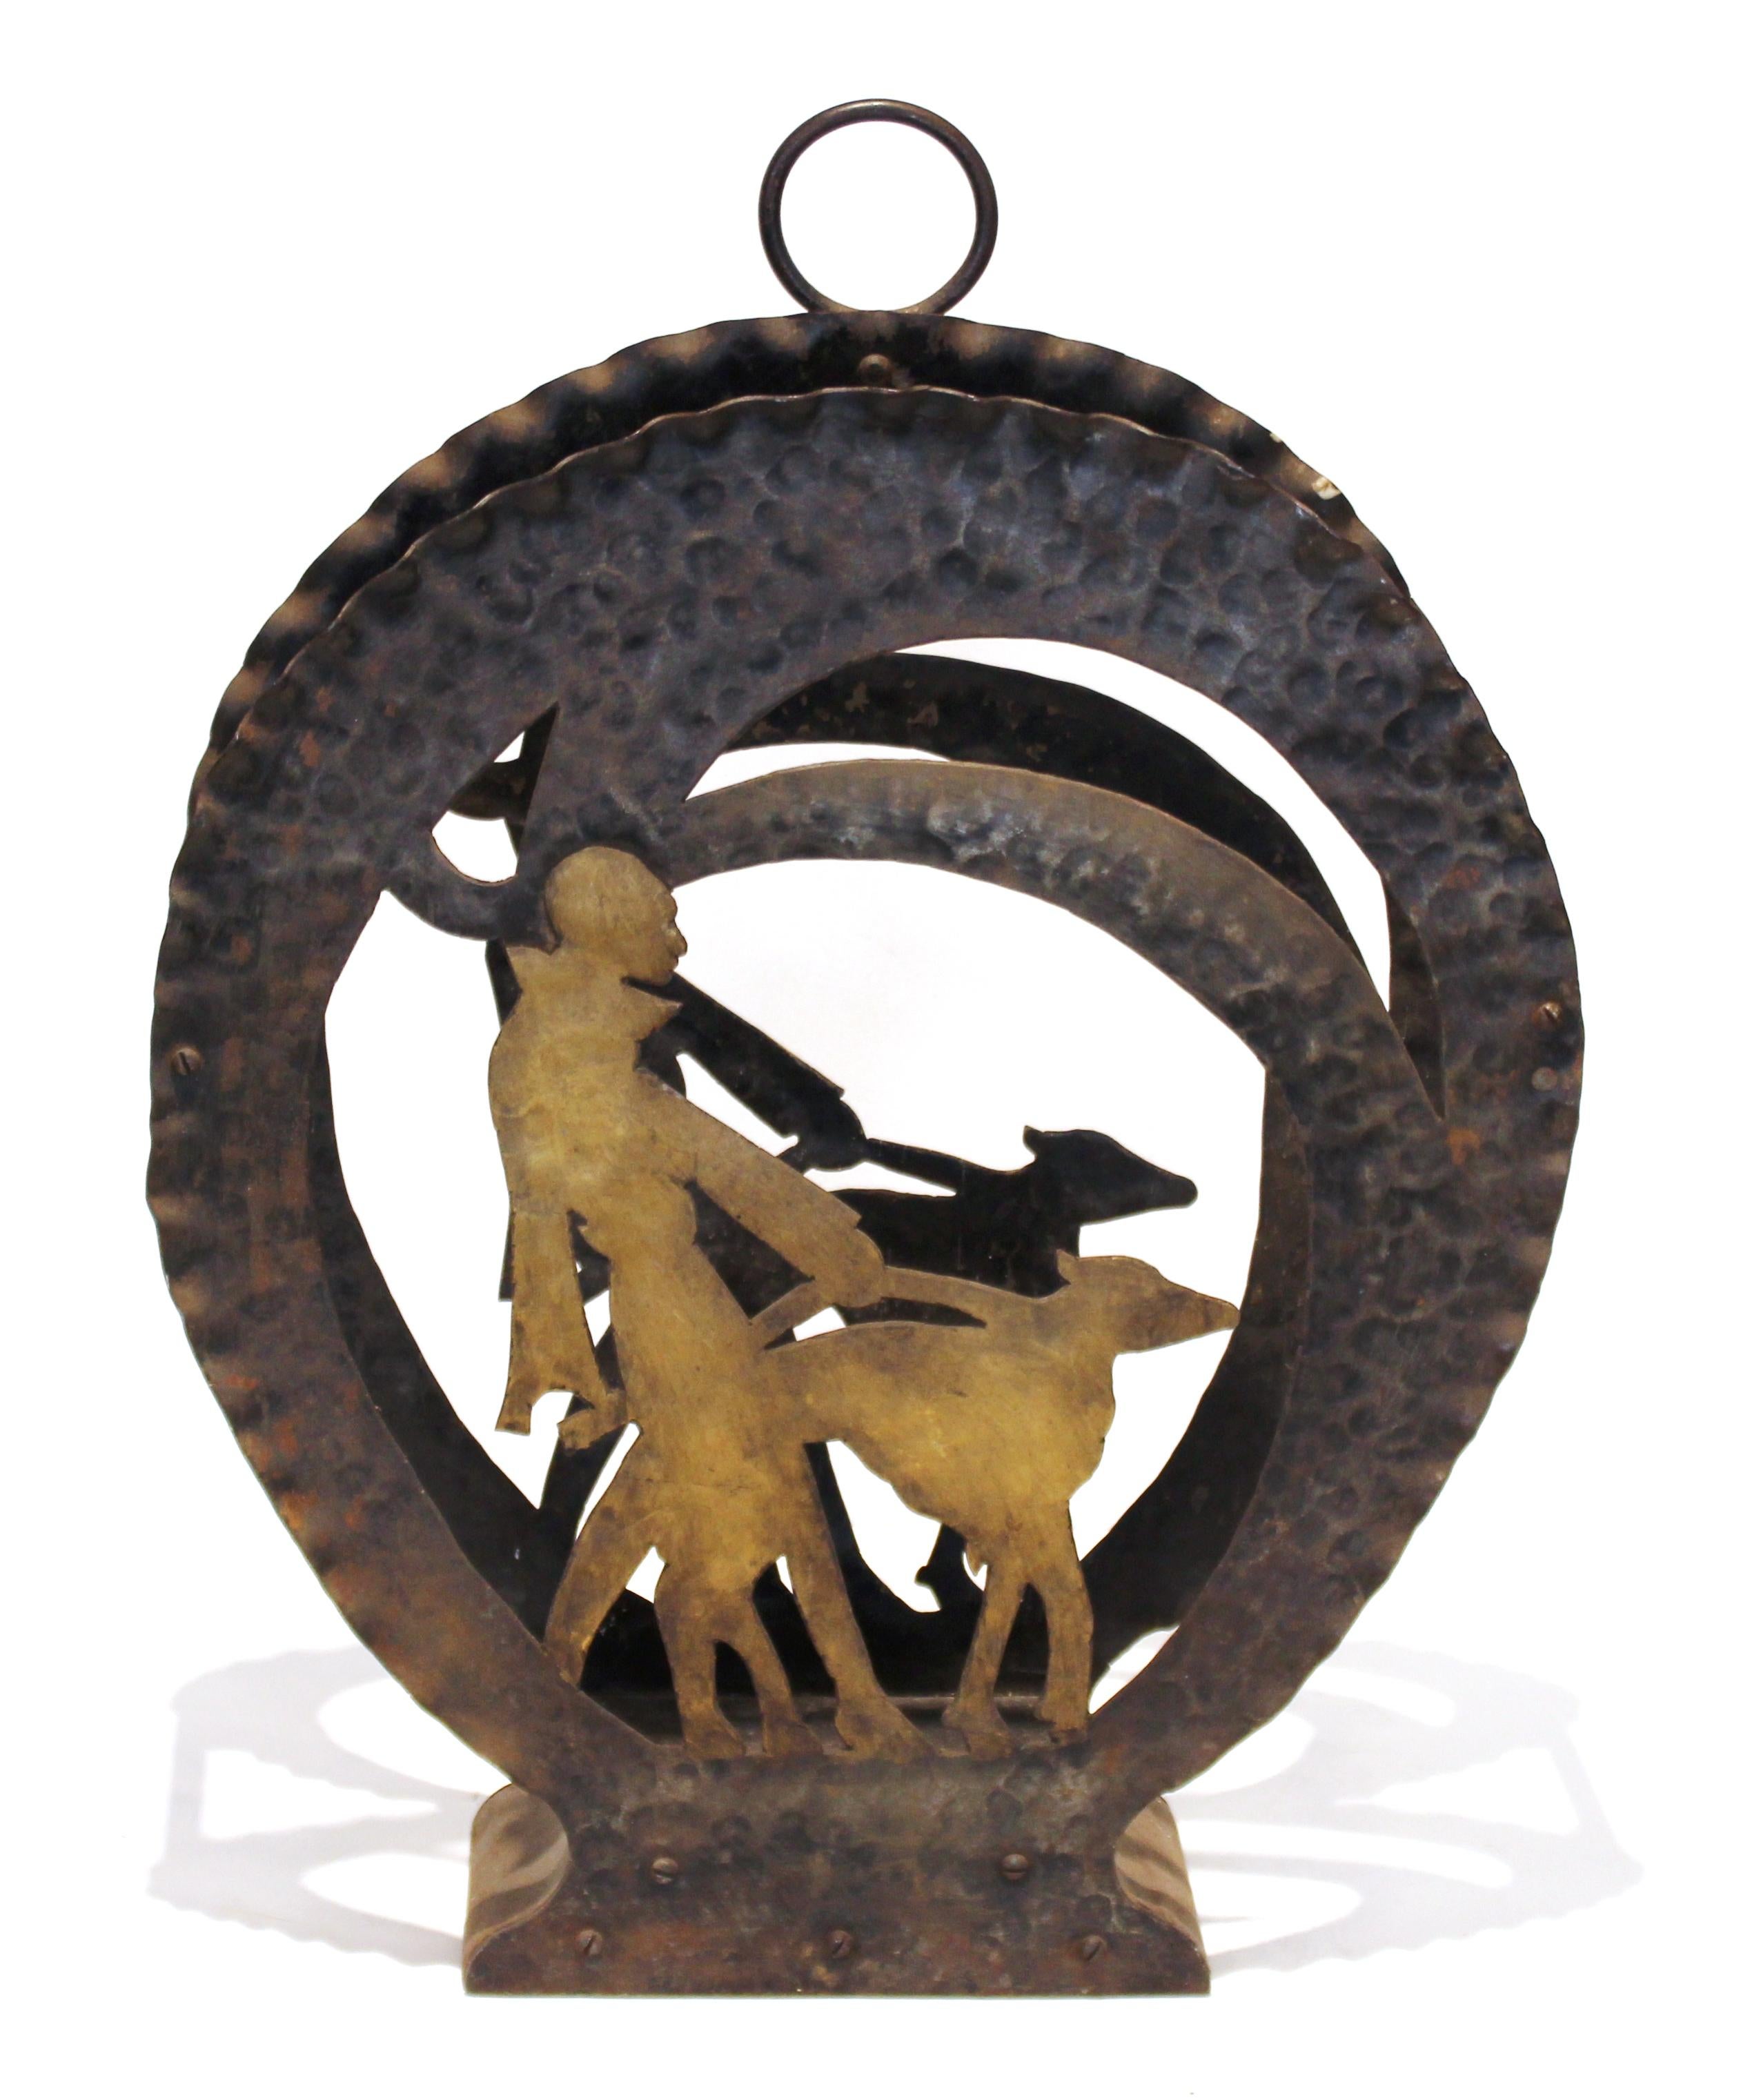 American Art Deco magazine rack made of wrought iron and cutout iron. The central vignette features a silhouette of a lady walking a dog and has a bronze patina. Can stand on floor or be hung on wall. 
In great vintage condition with